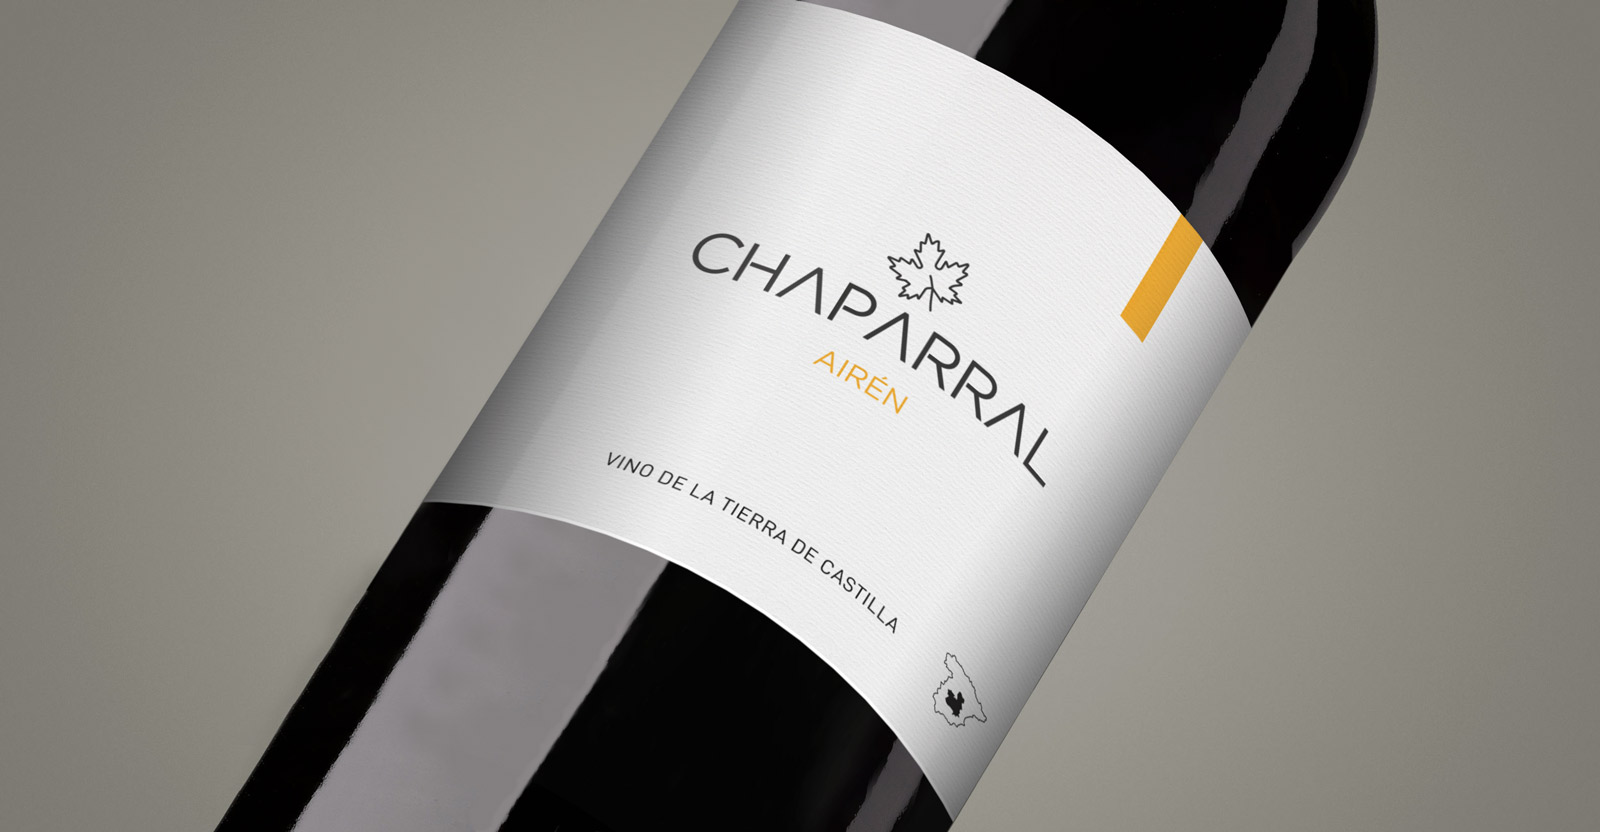 Graphic and creative design of wine labels and packaging for CHAPARRAL